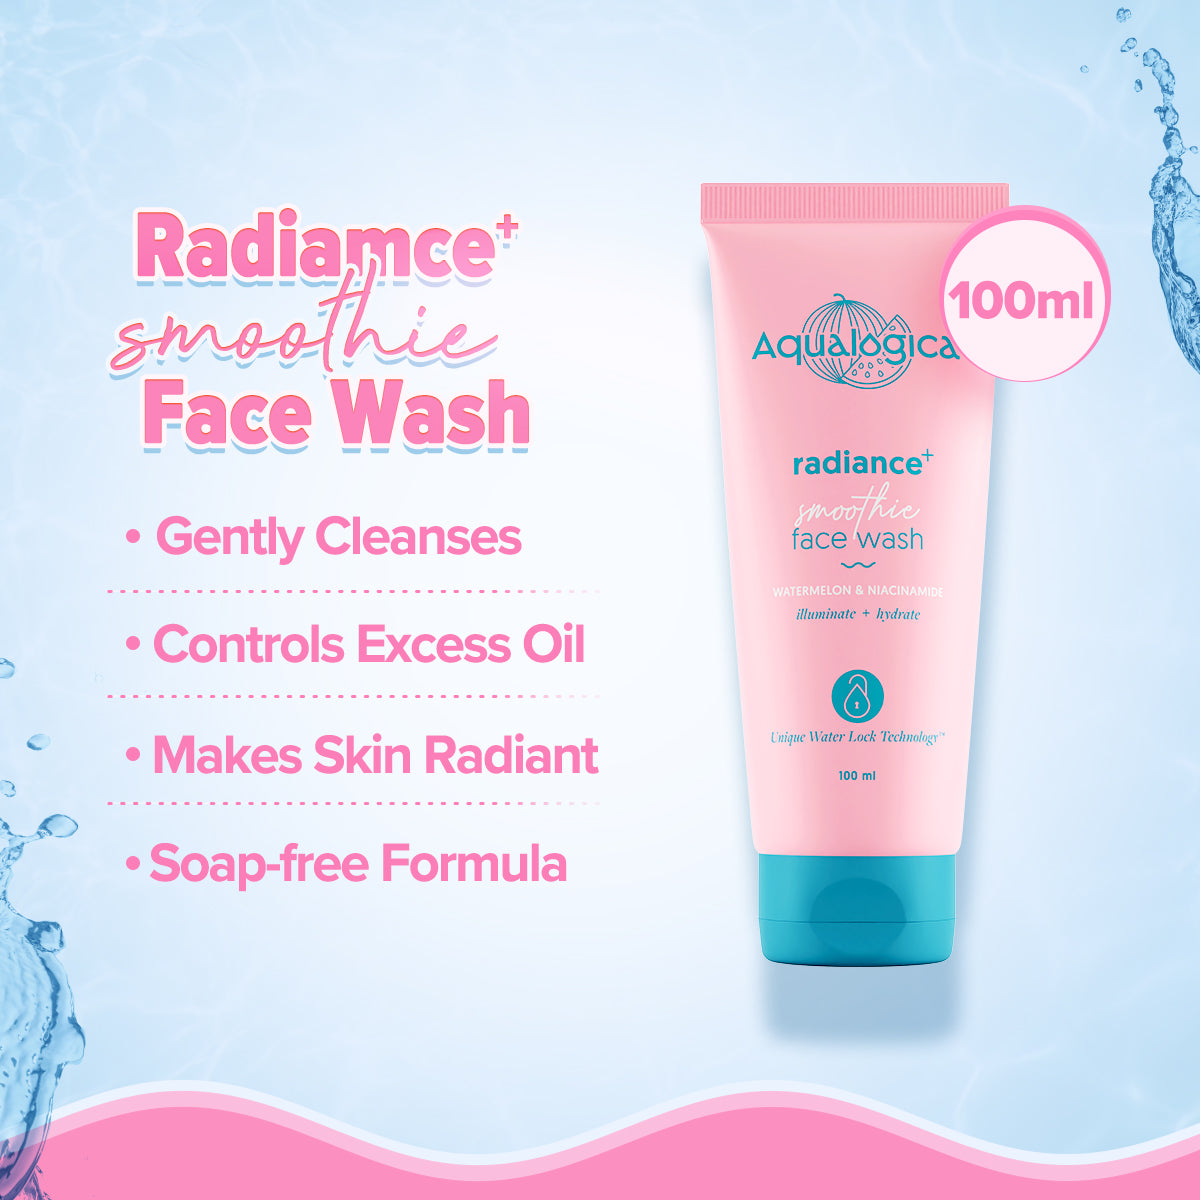 Radiance+ Cleanse & Hydrate Combo (Radiance+ Smoothie Face Wash 100ml + Radiance+ Oil-Free Moisturizer)